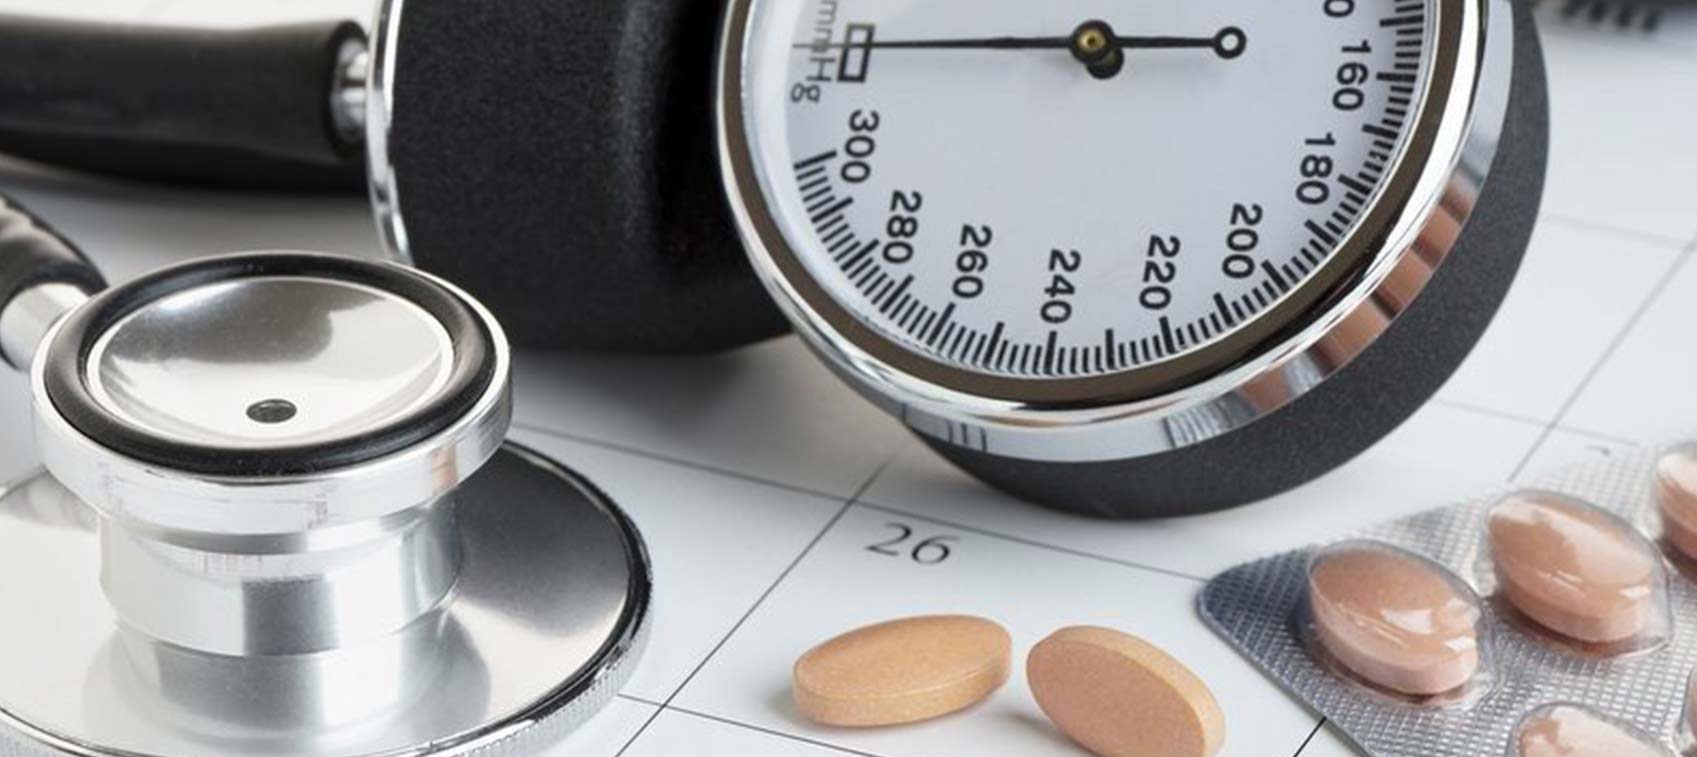 Reducing High Blood Pressure With Conventional Medications: Know the Side Effects